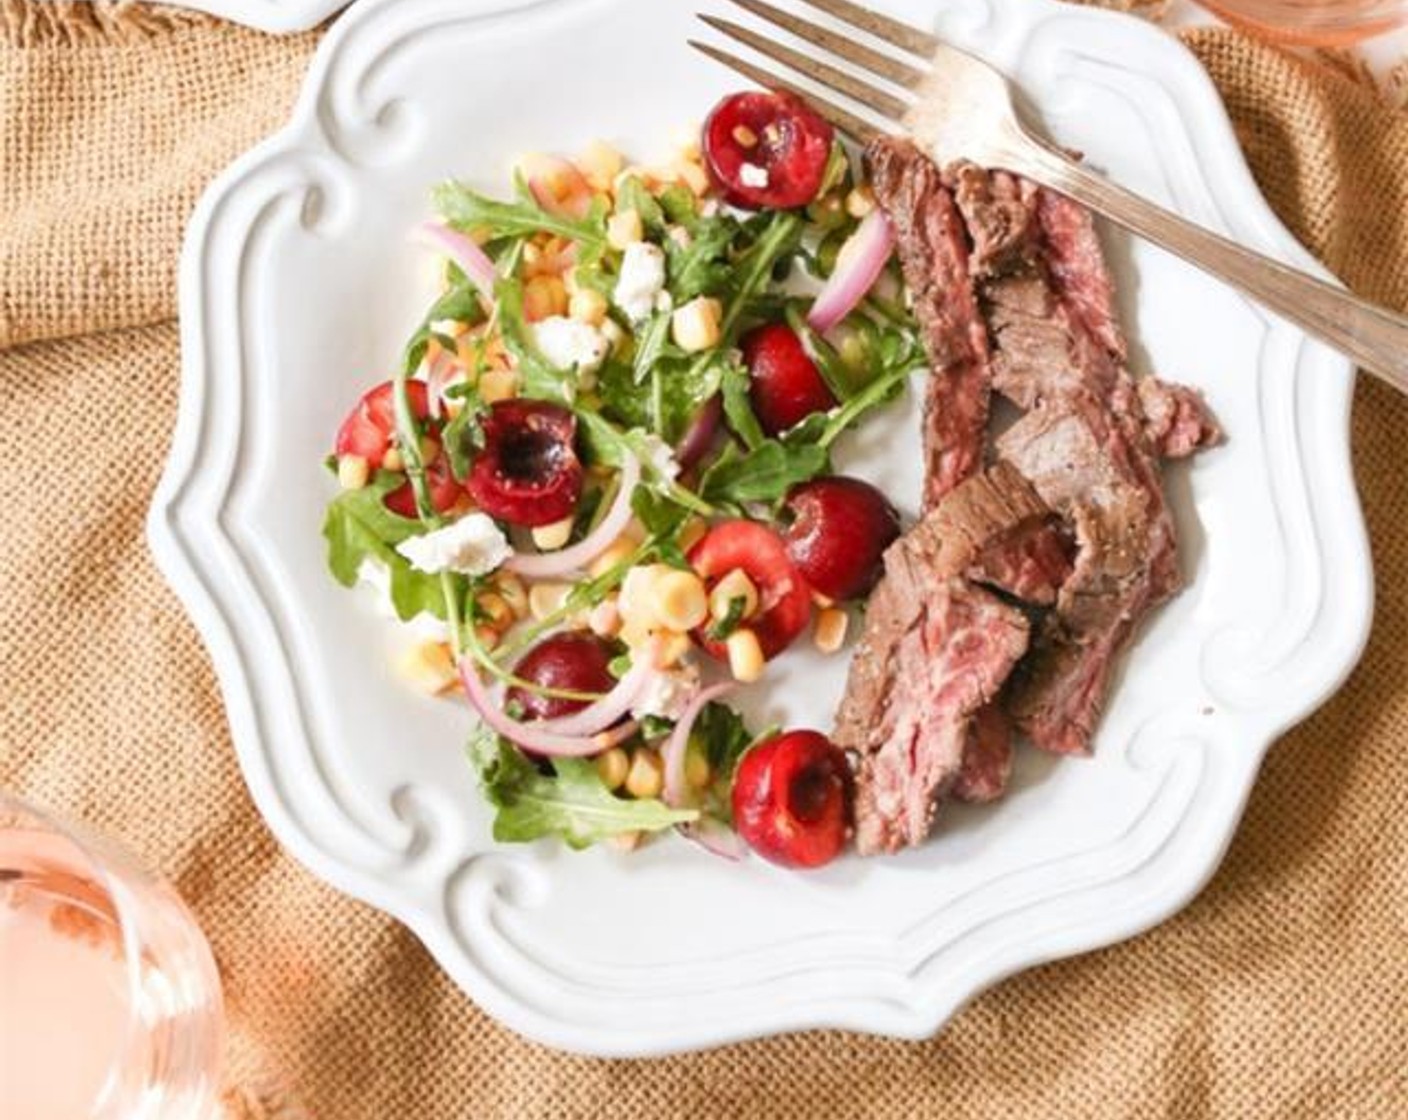 Marinated Steak with Sweet Corn and Cherry Salad